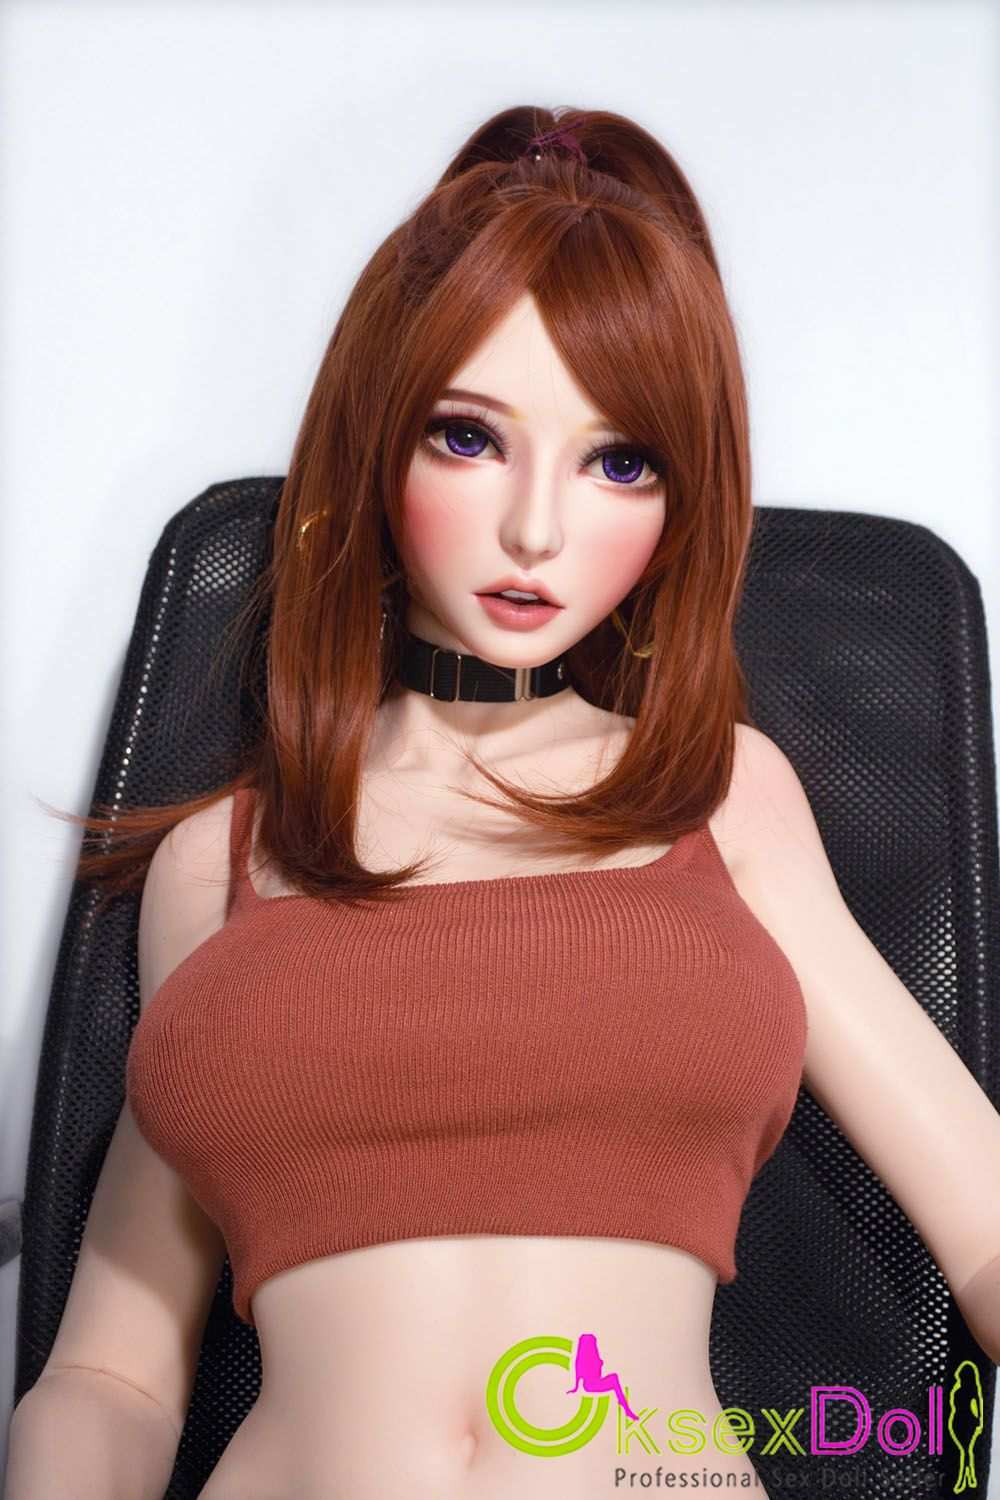 B-cup Doll Gallery